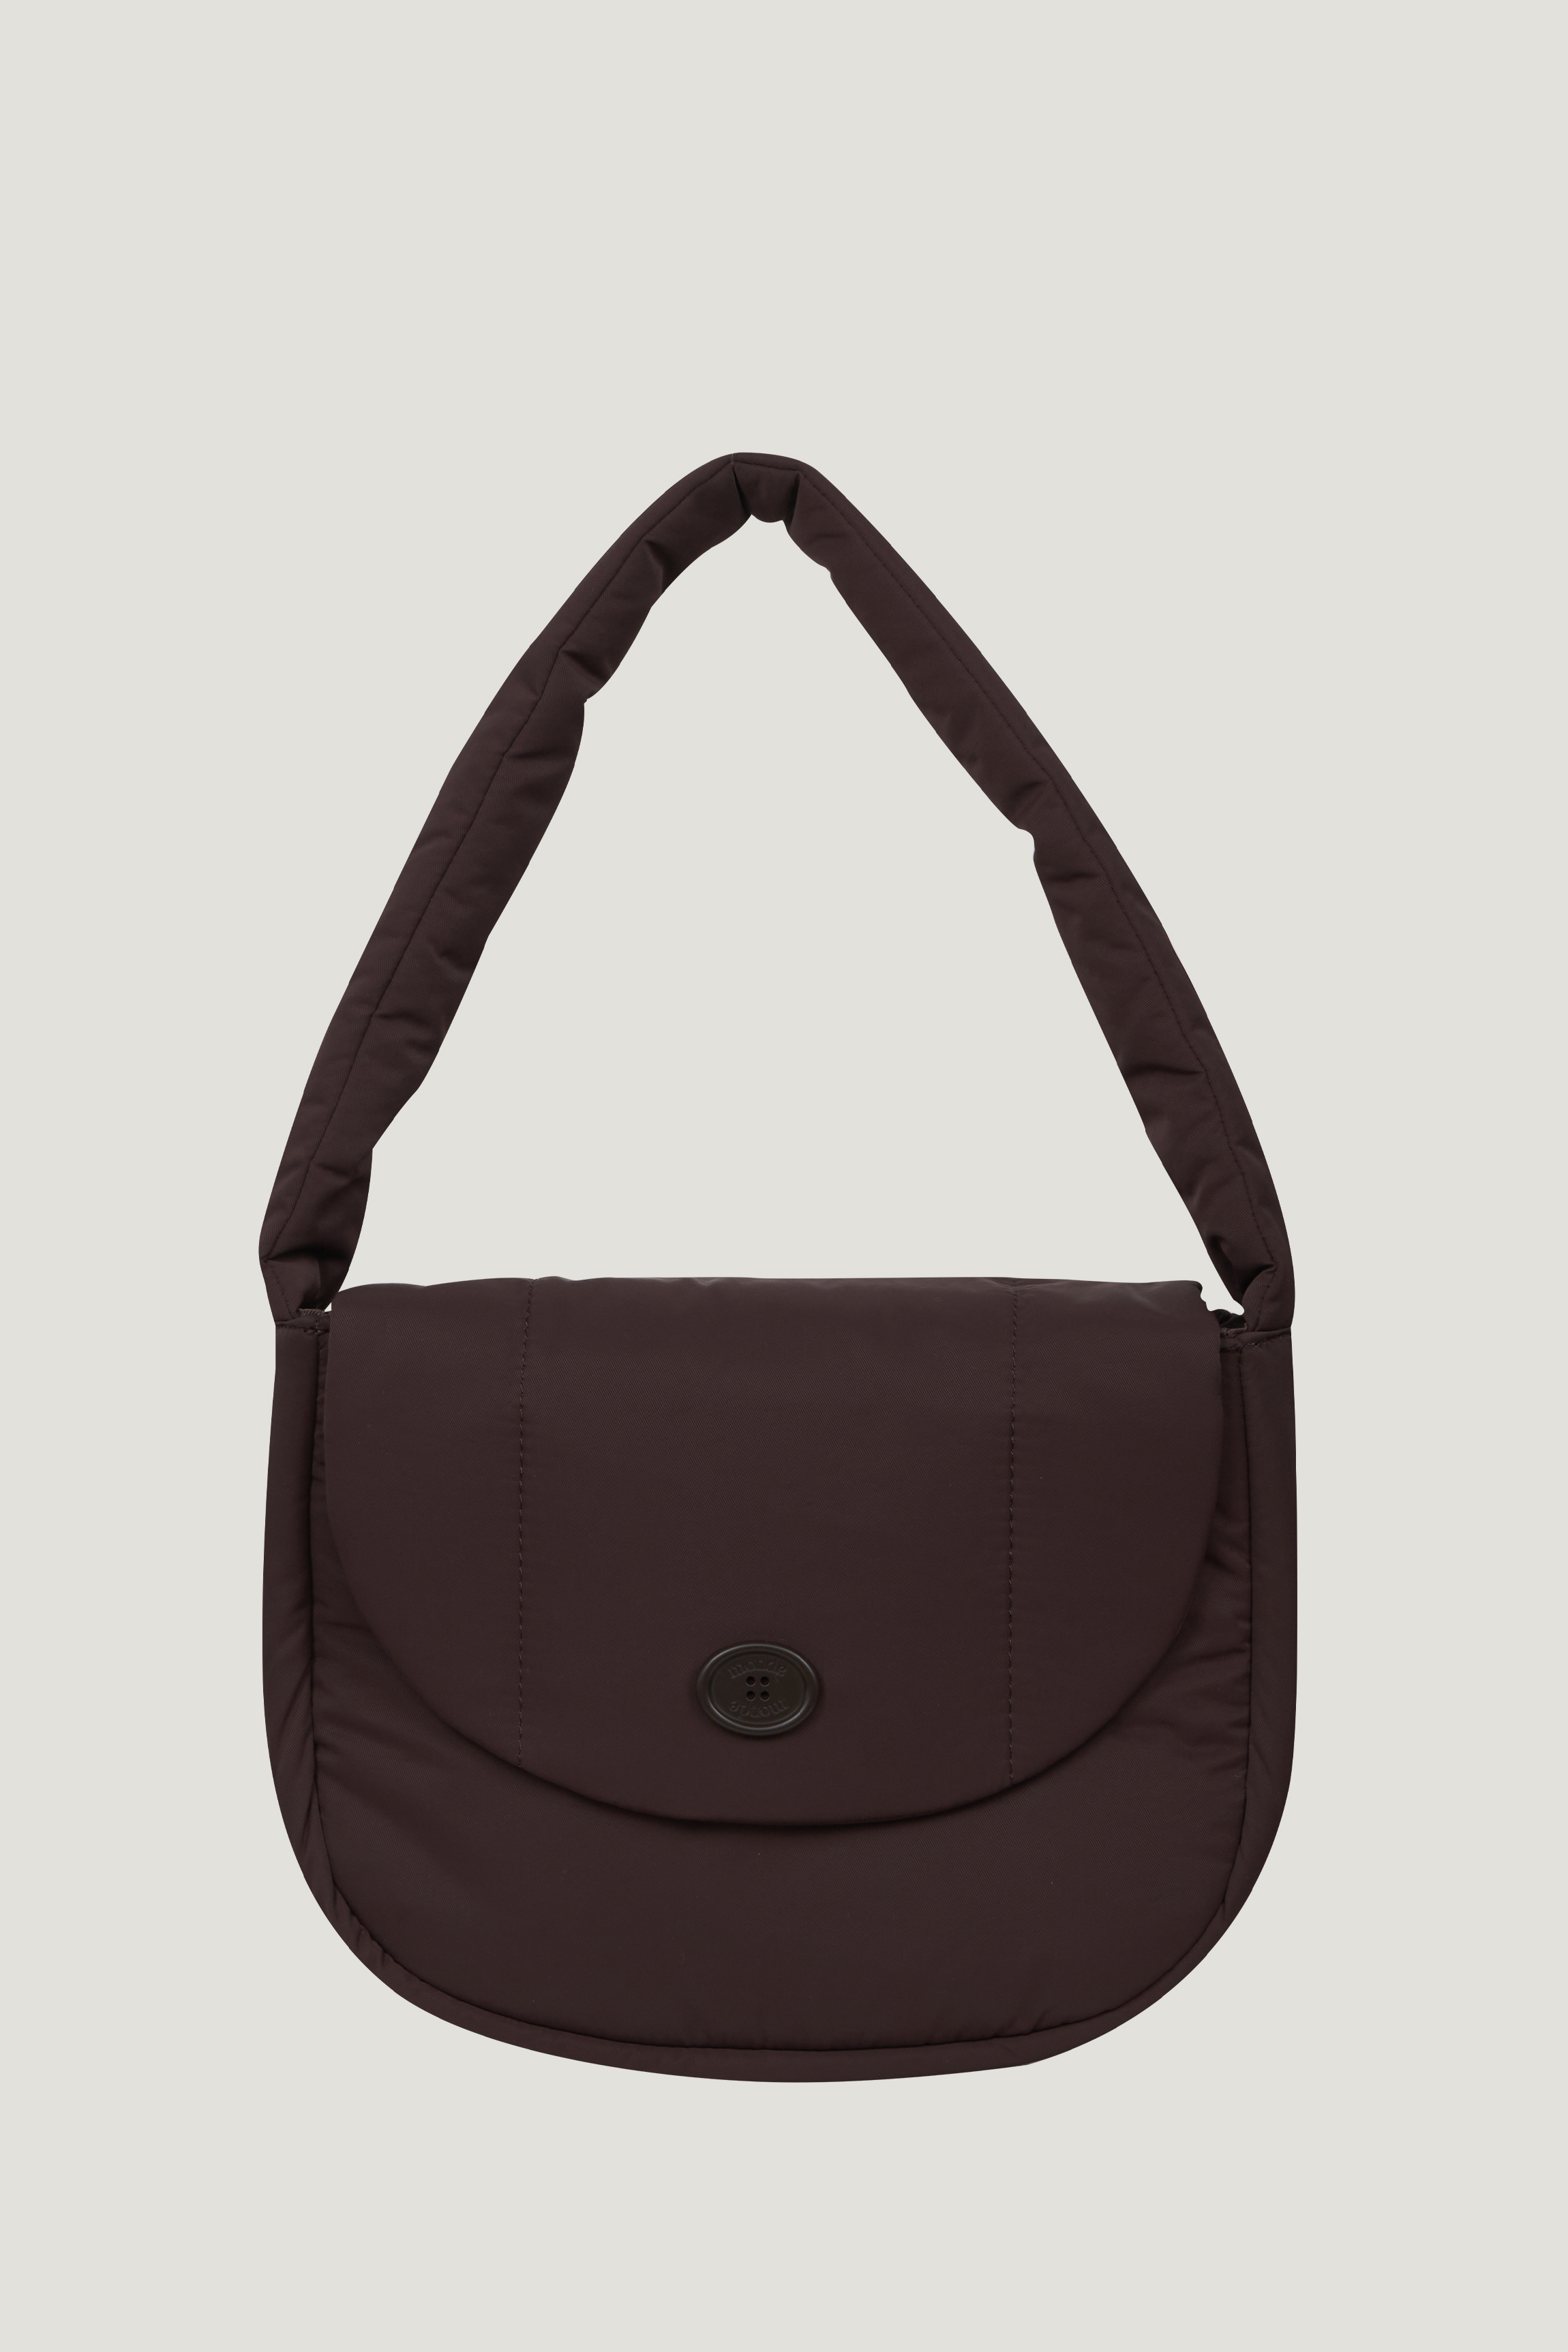 classic button padding shoulder bag chocolate brown